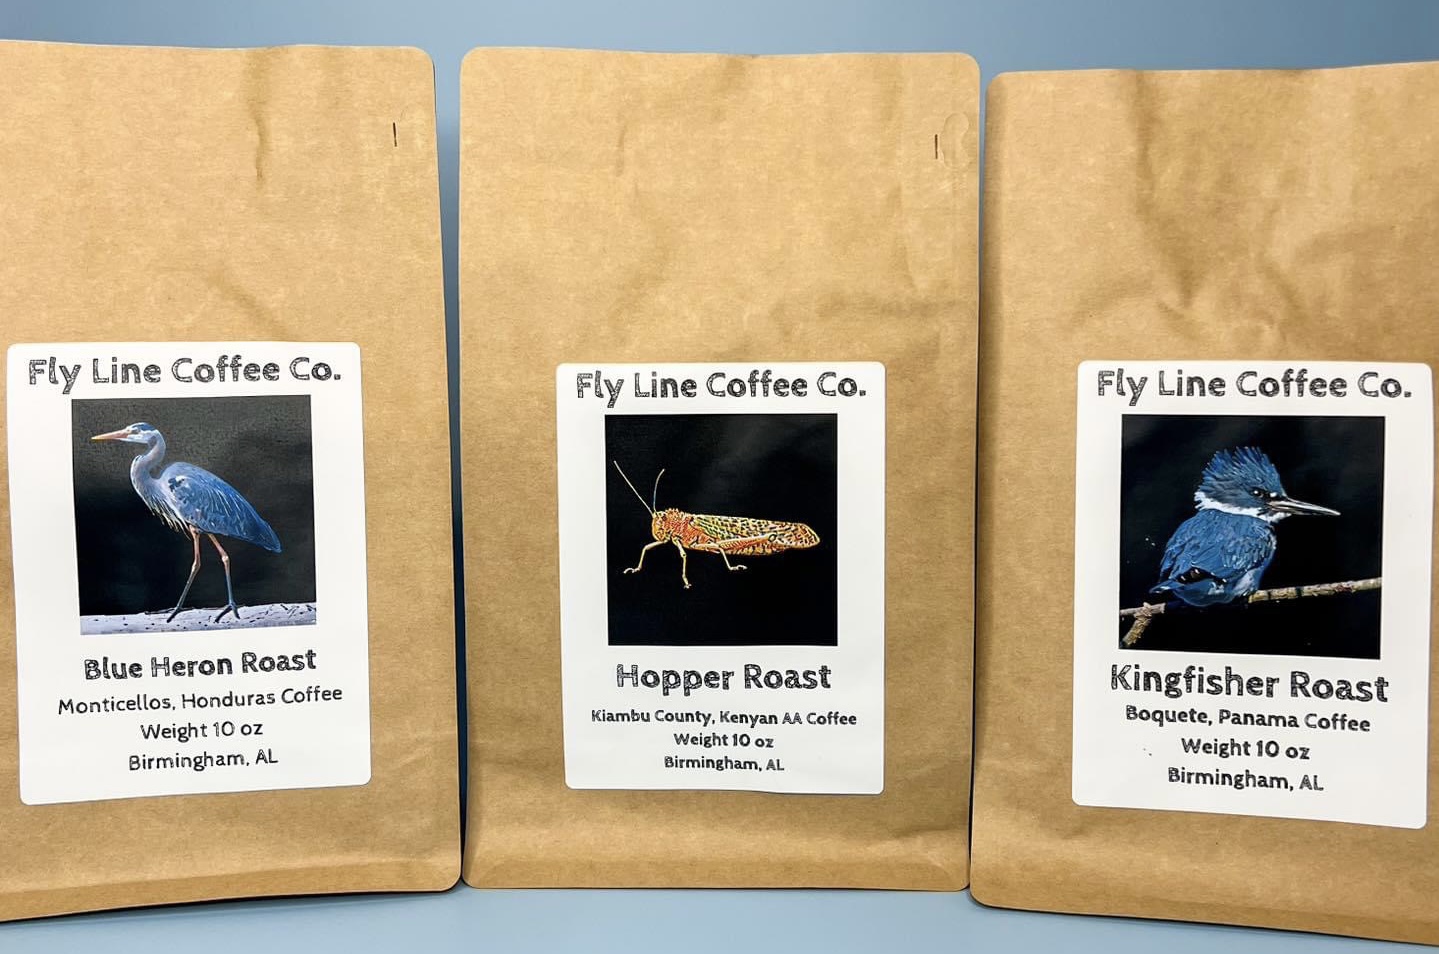 Fly Line Coffee Co. brings fresh-roasted specialty coffees to Trussville